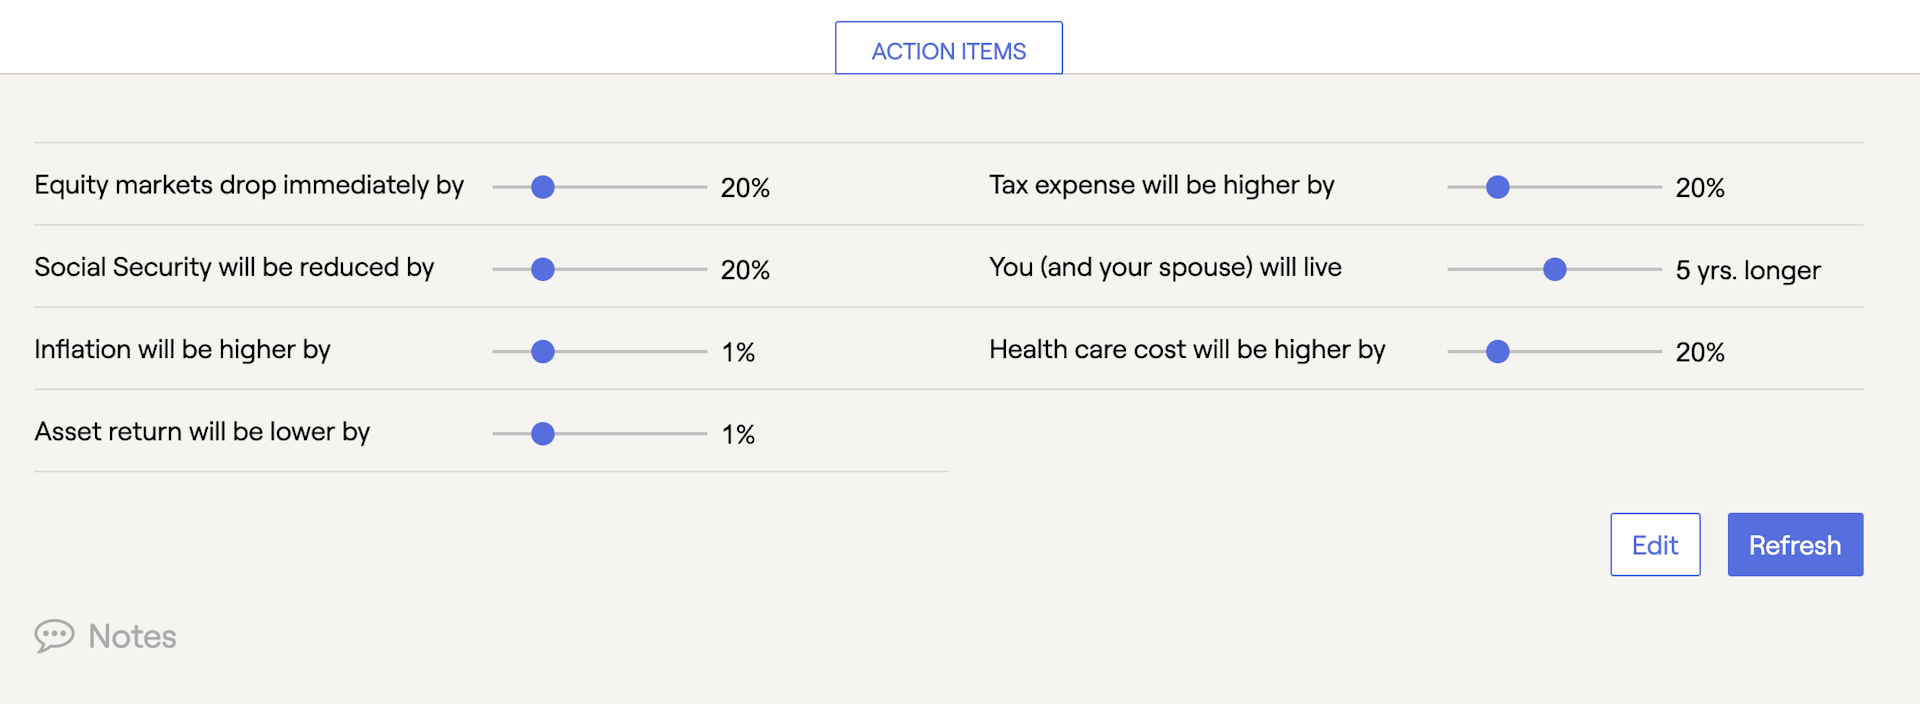 Screenshot of expanded Action Items for Retirement Stress Test 